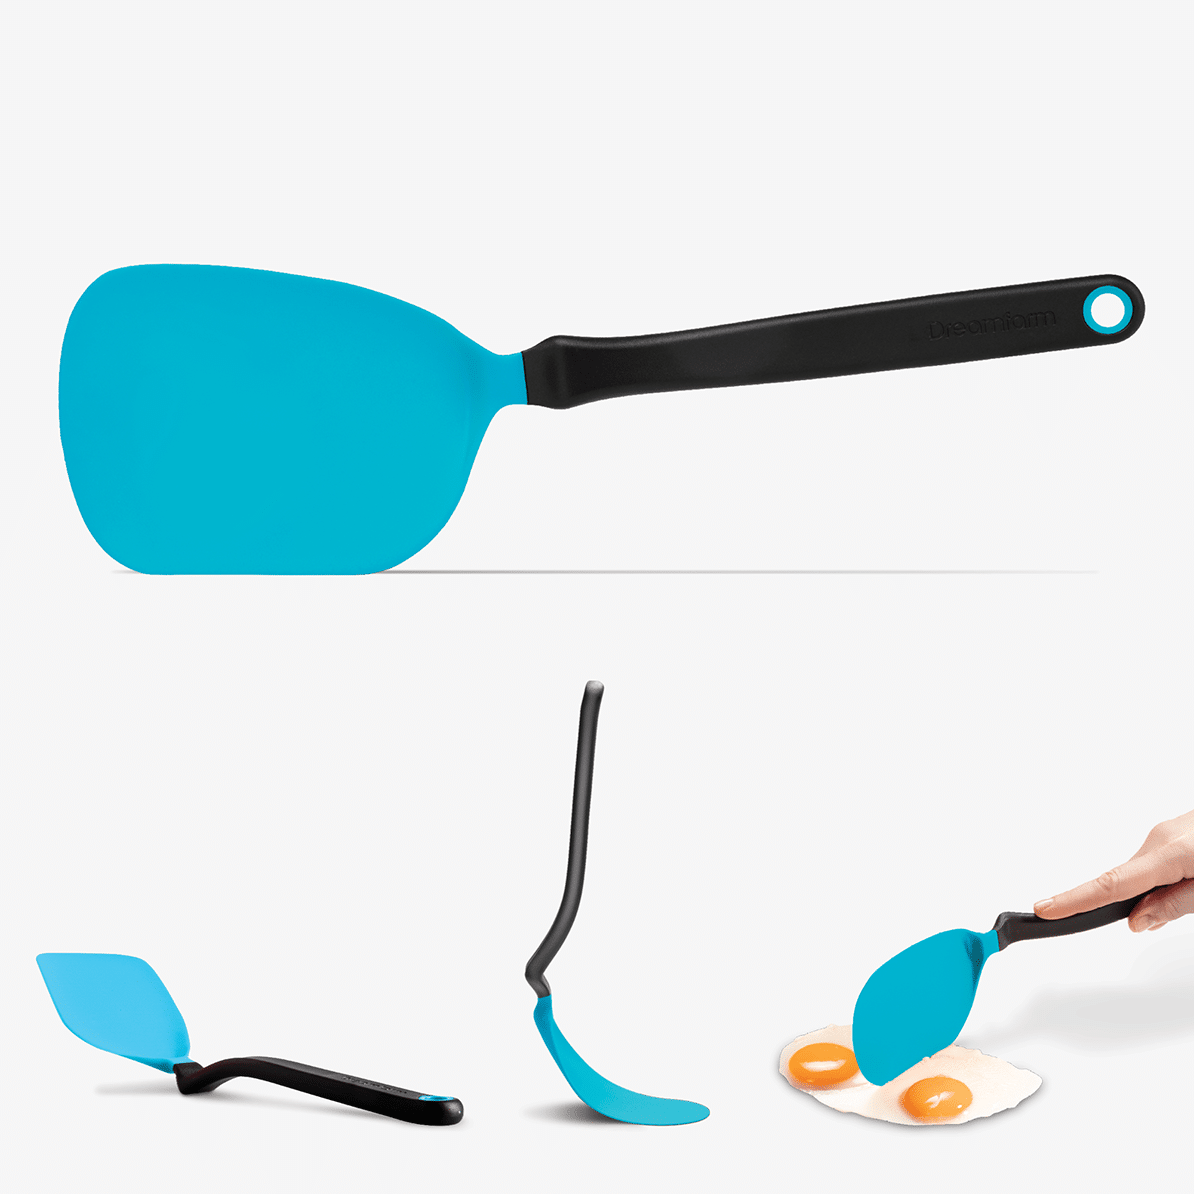 The Chopula's small, but just as mighty, sibling! The Mini Chopula's small, flexible head easily slides under food for a clean lift, making it perfect for cookies, eggs, and brownies. The angled handle and multi-curved head reach every corner of any pan or tray, while keeping your hand away from food and heat.&nbsp;